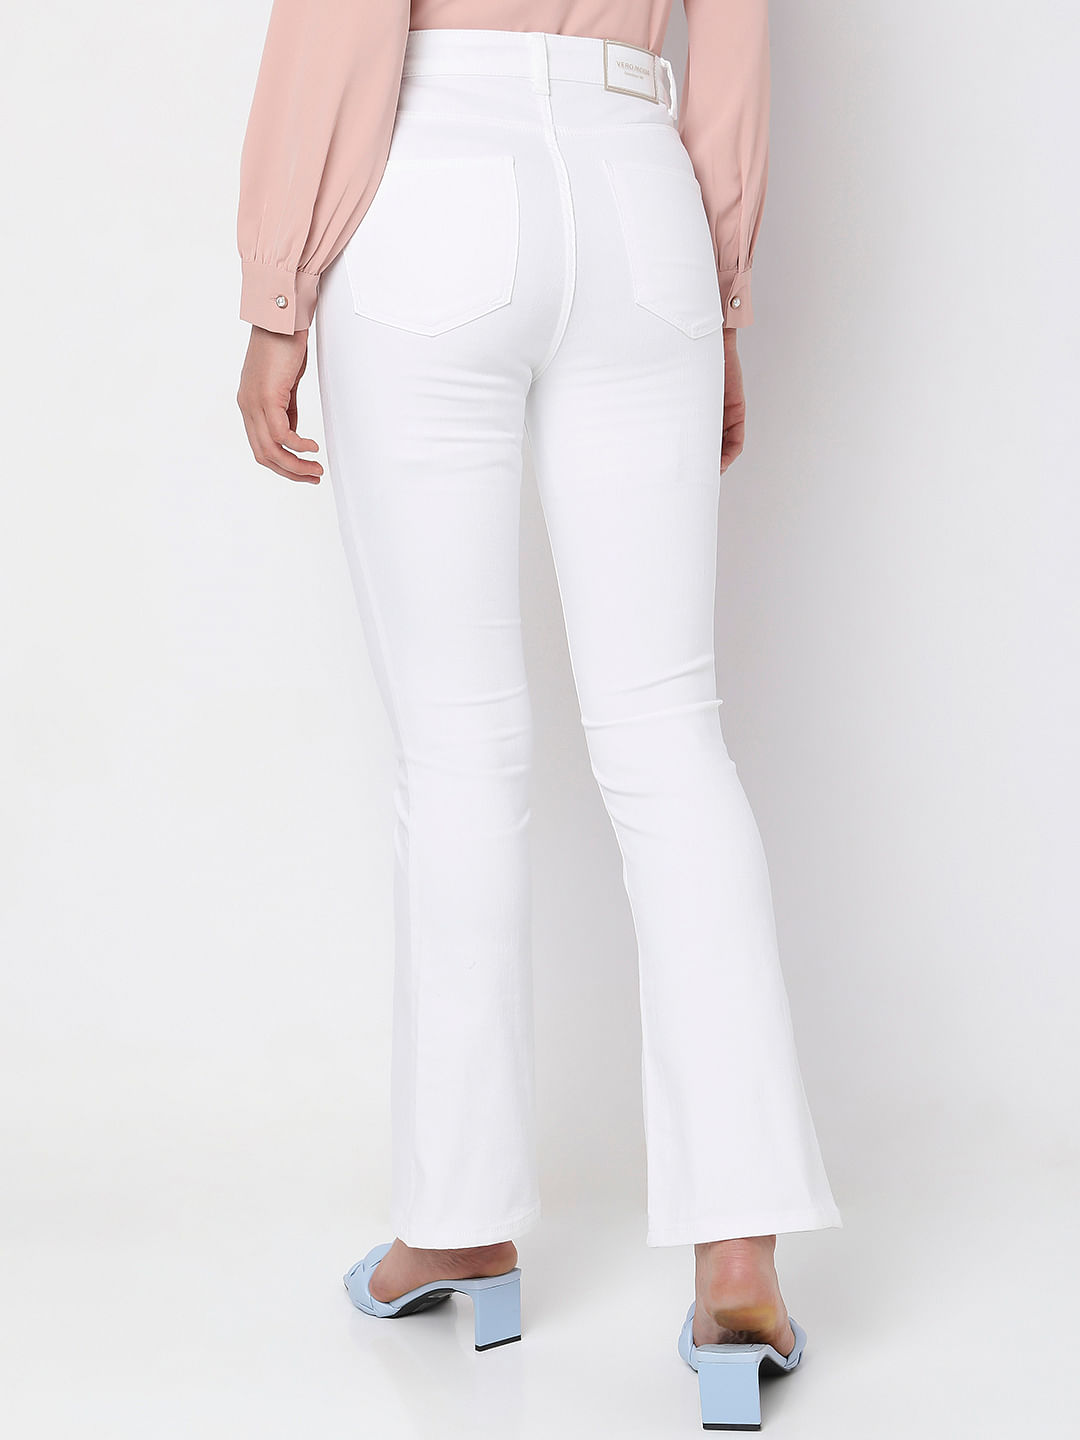 Perfect Silhouette | Bell Bottom Jeans - White | Cutely Covered